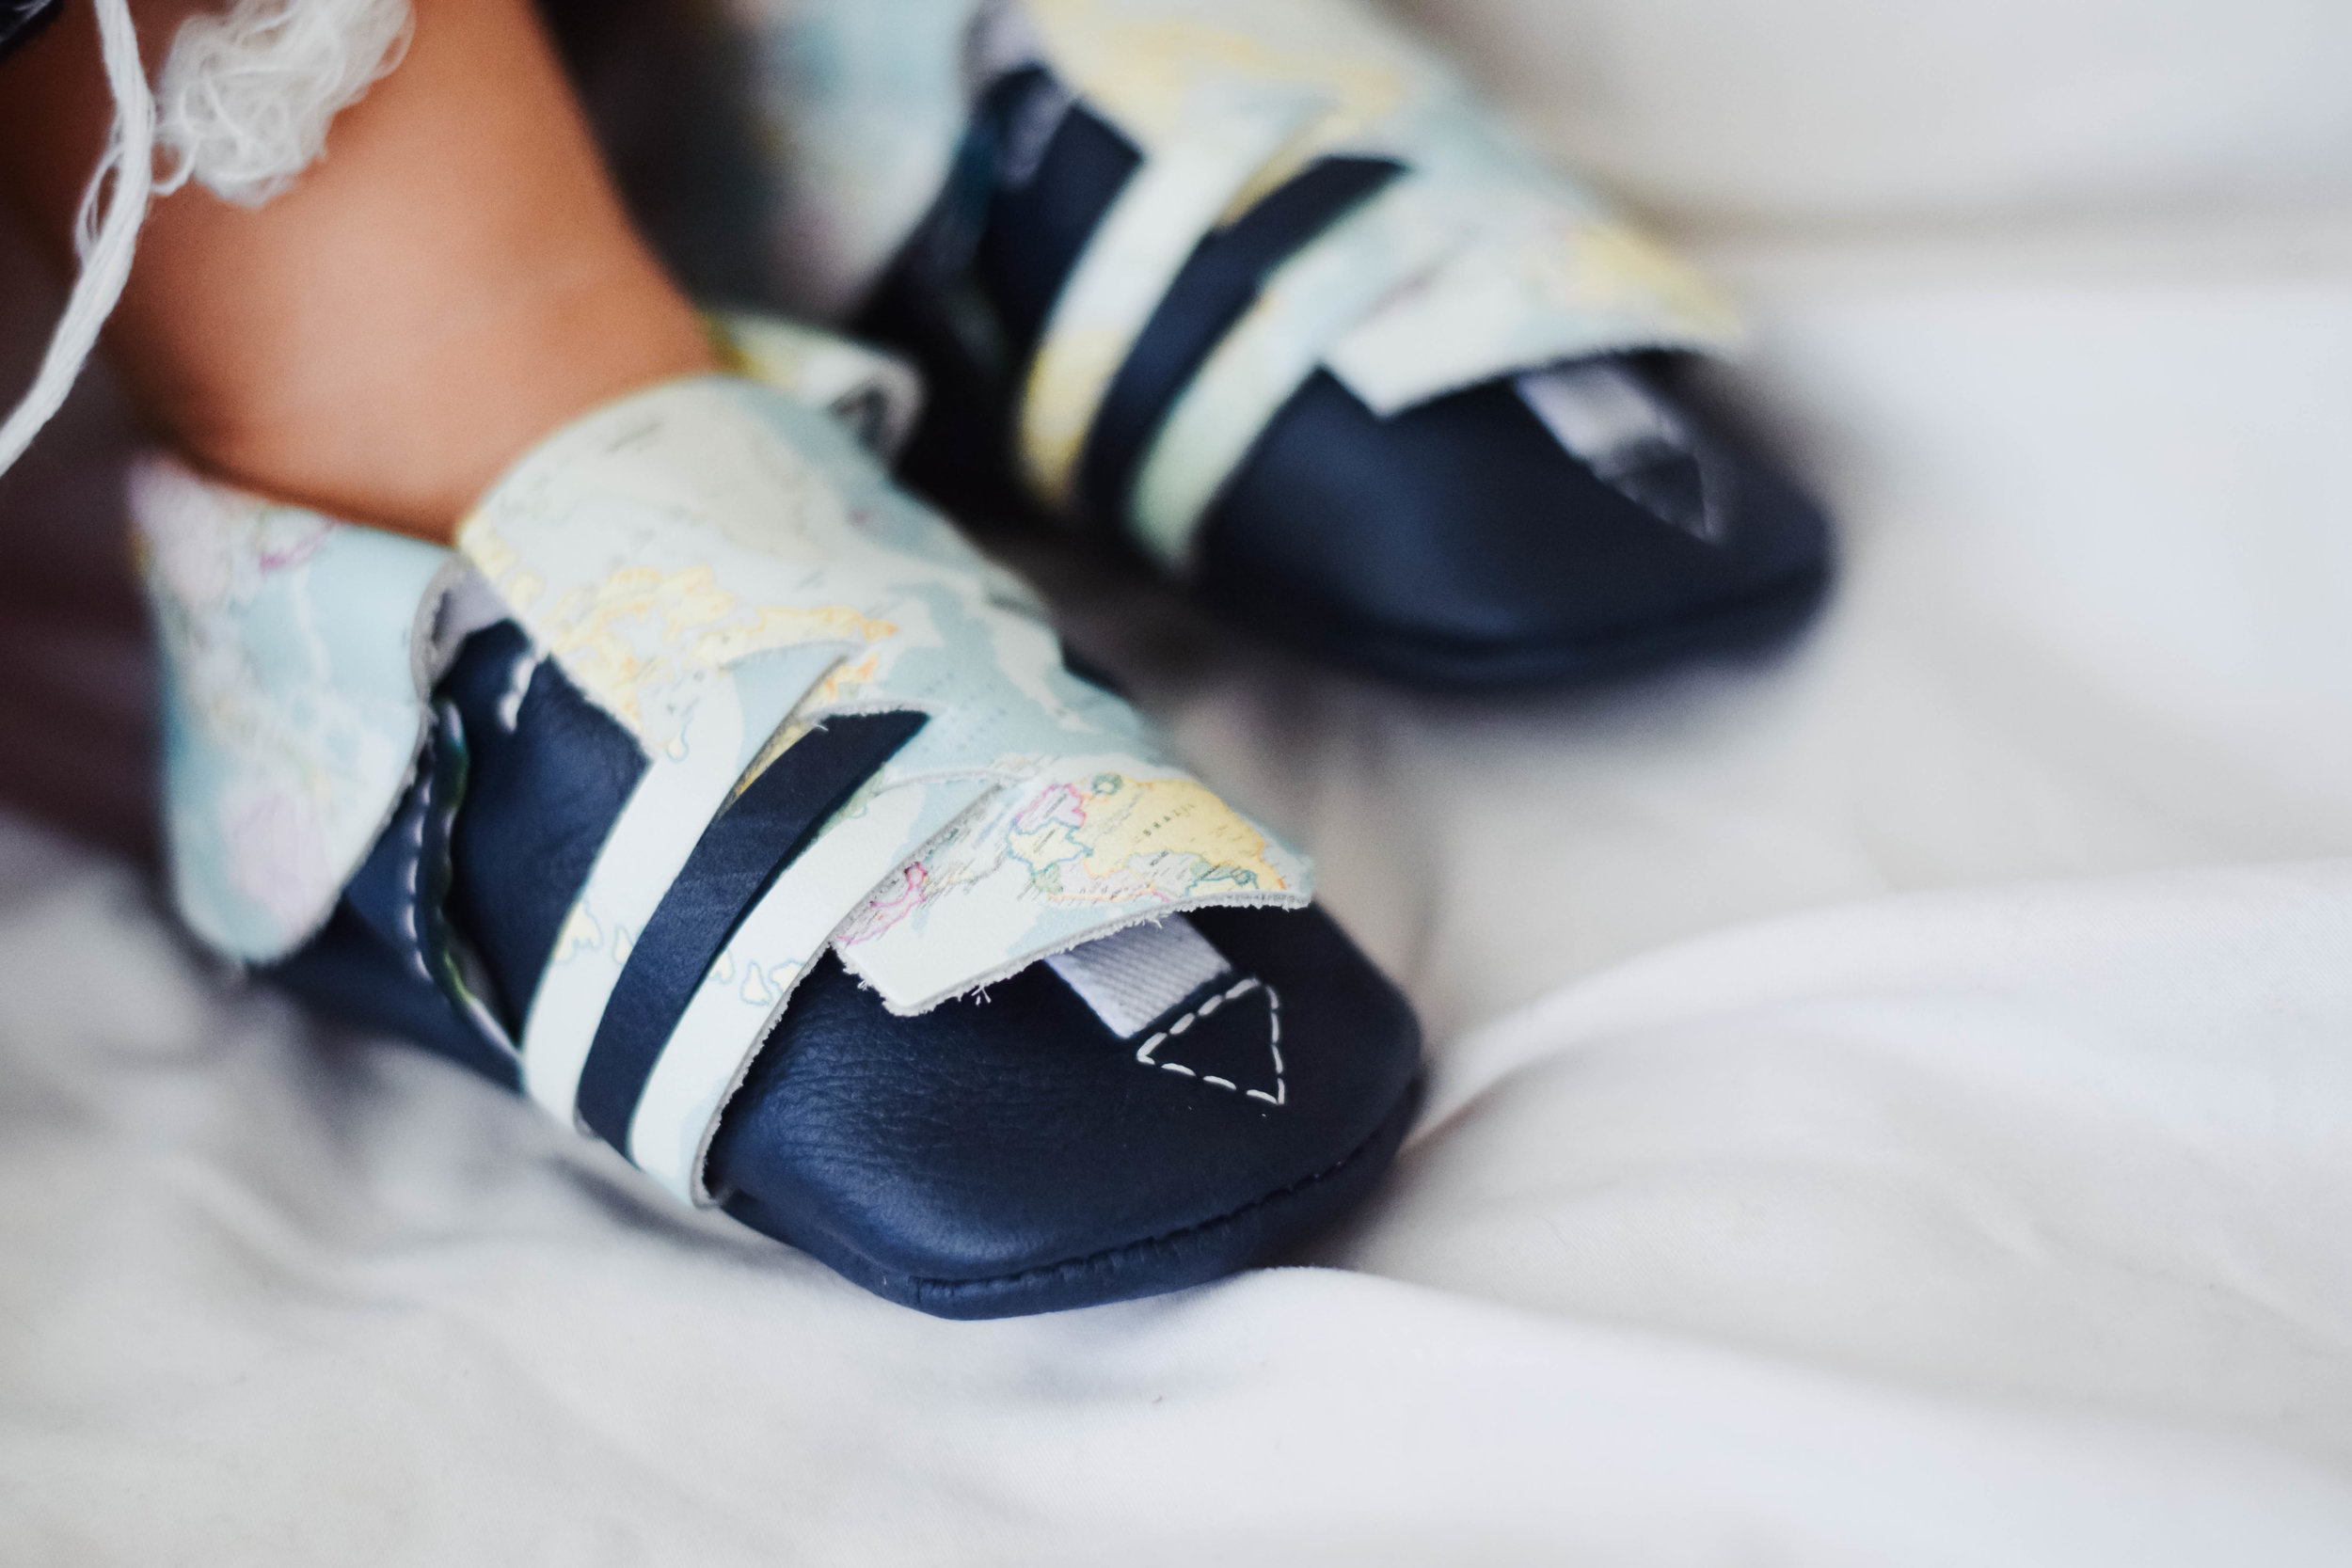 Kinbe - Moccasins That Grow With Your Baby's Feet - Socially Conscious Kids Fashion - Kinbe Village Drive